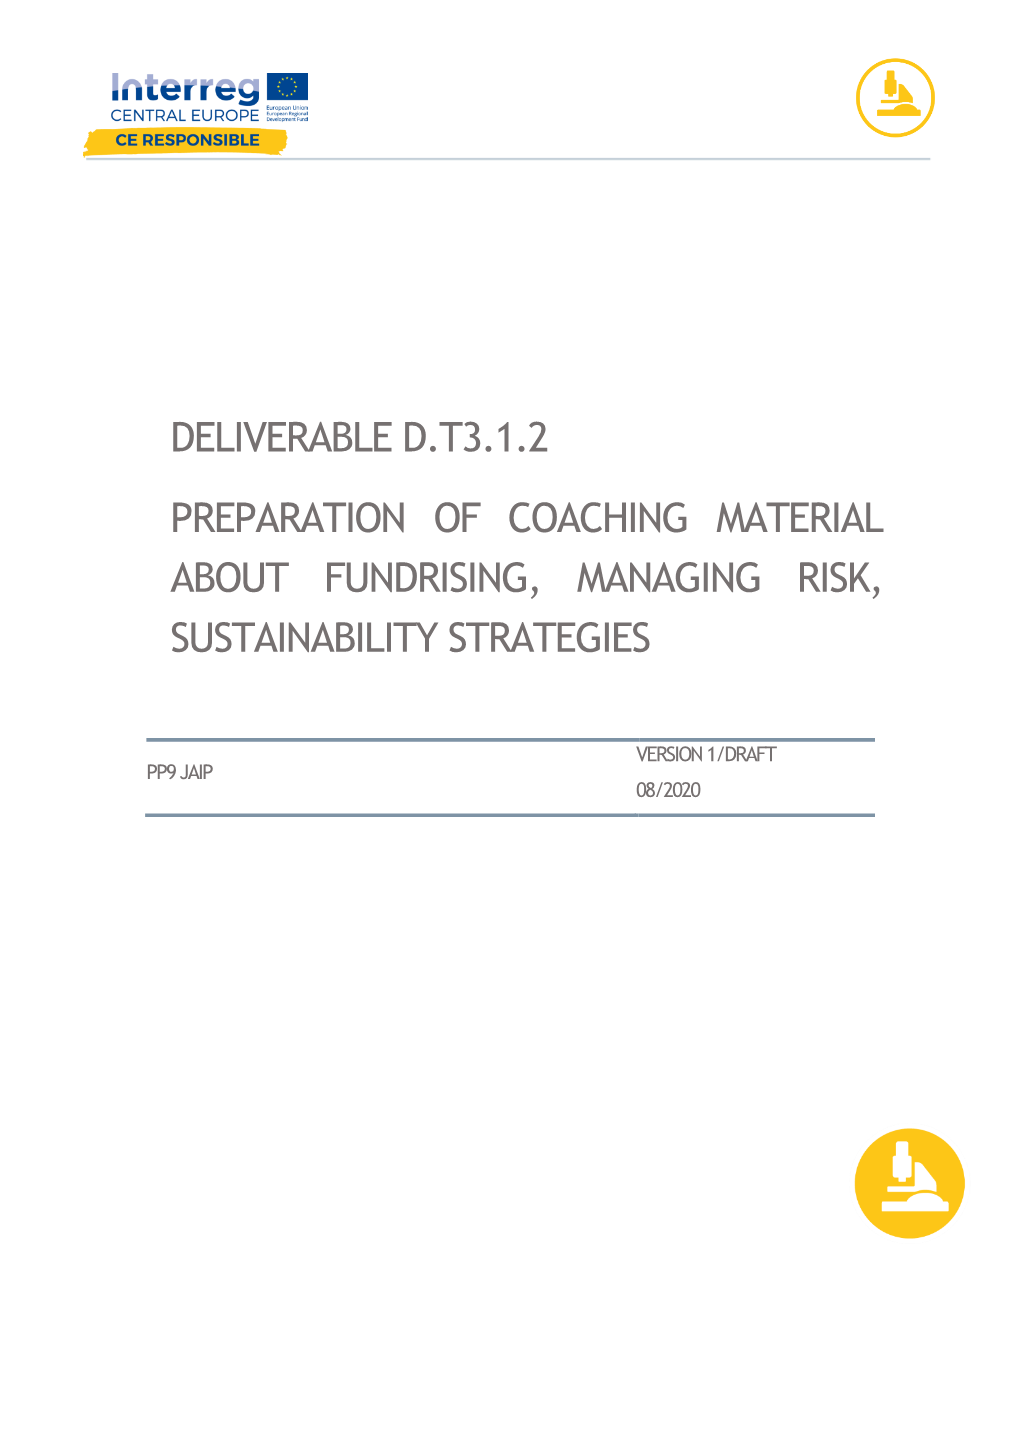 DELIVERABLE D.T3.1.2 Preparation of Coaching Material About Deliverable Title: Fundraising, Managing Risk, Sustainability Strategies